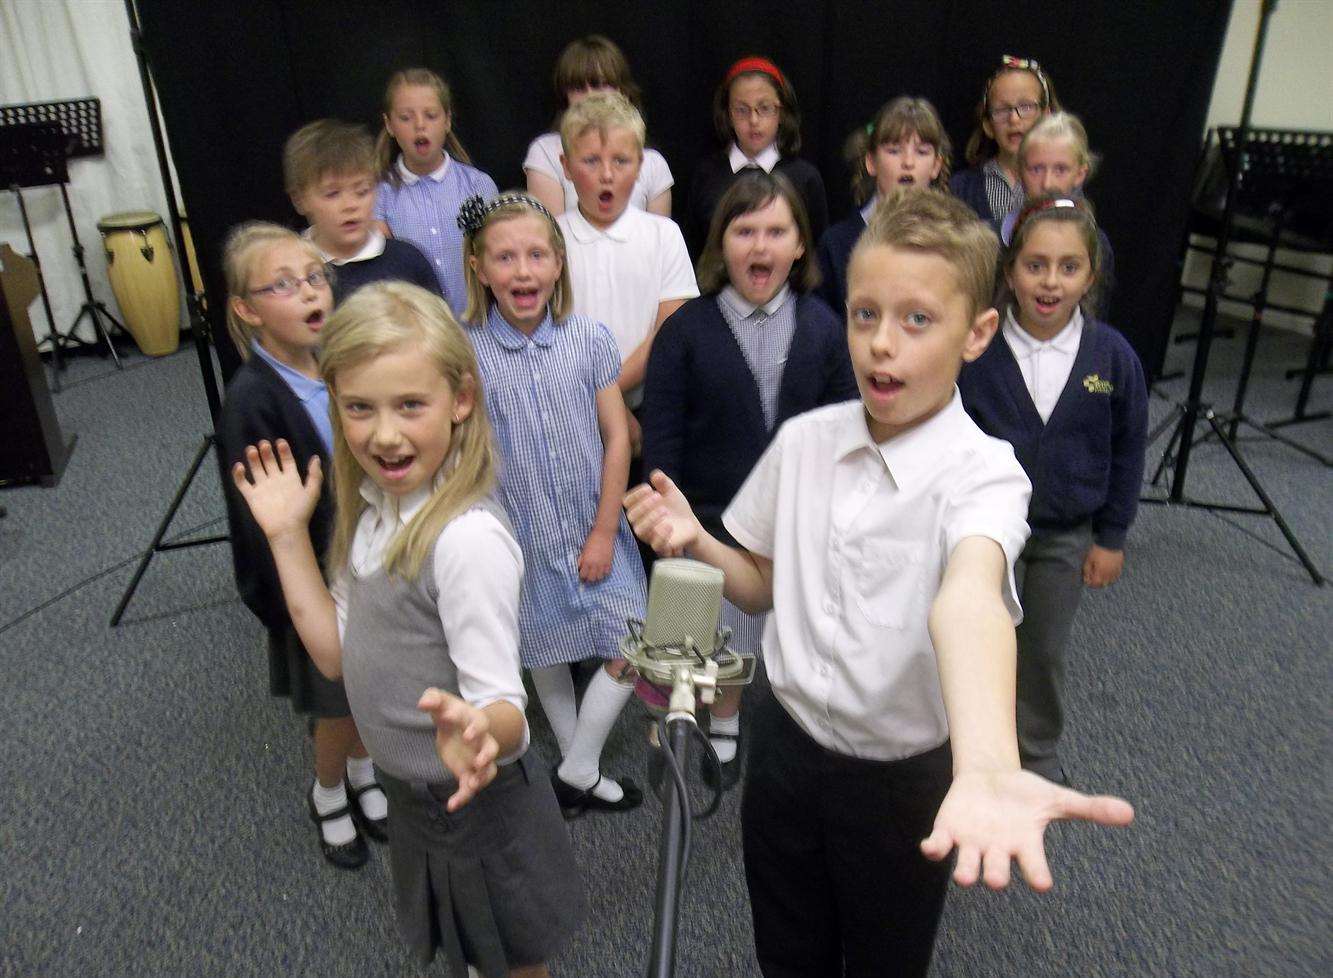 Isabel, seven, and Daniel, 11, of Bromstone Primary School, Thanet, take part in the finals of the 2014 KM Walk to School Song Contest. The school was named the winner of the annual contest